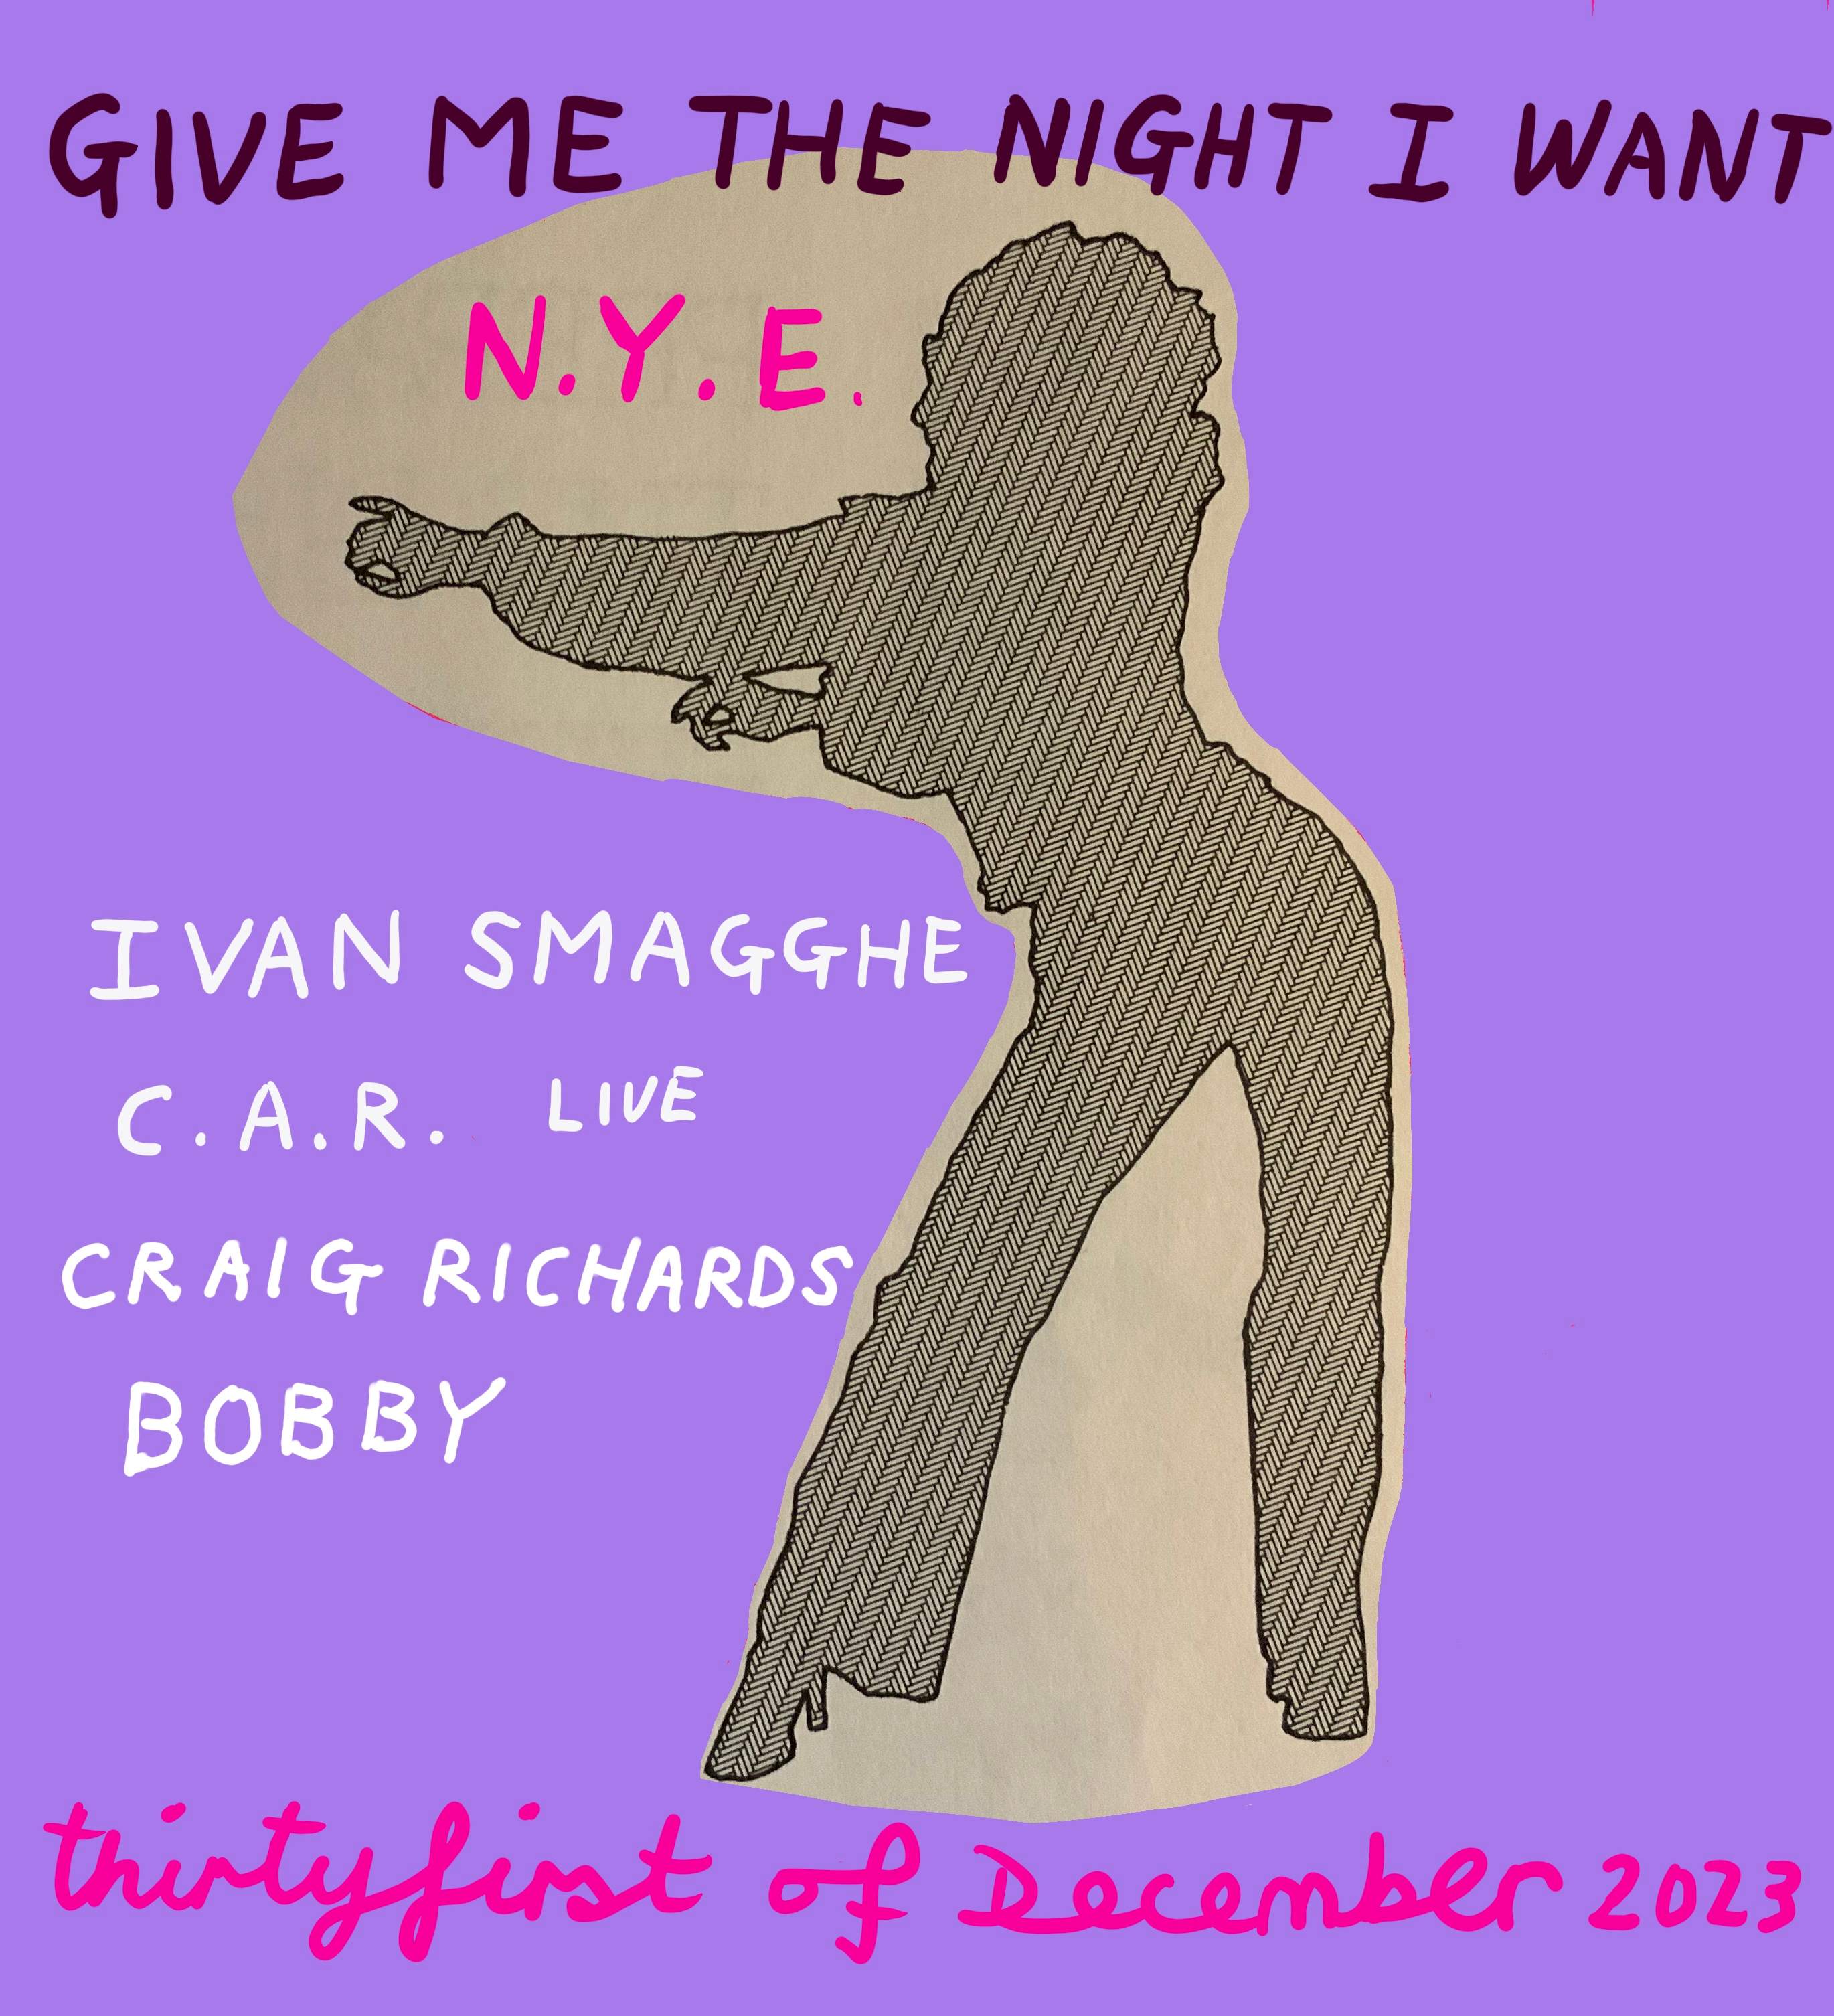 Give Me The Night I Want on NYE with Ivan Smagghe, Craig Richards, C.A.R & Bobby - フライヤー表